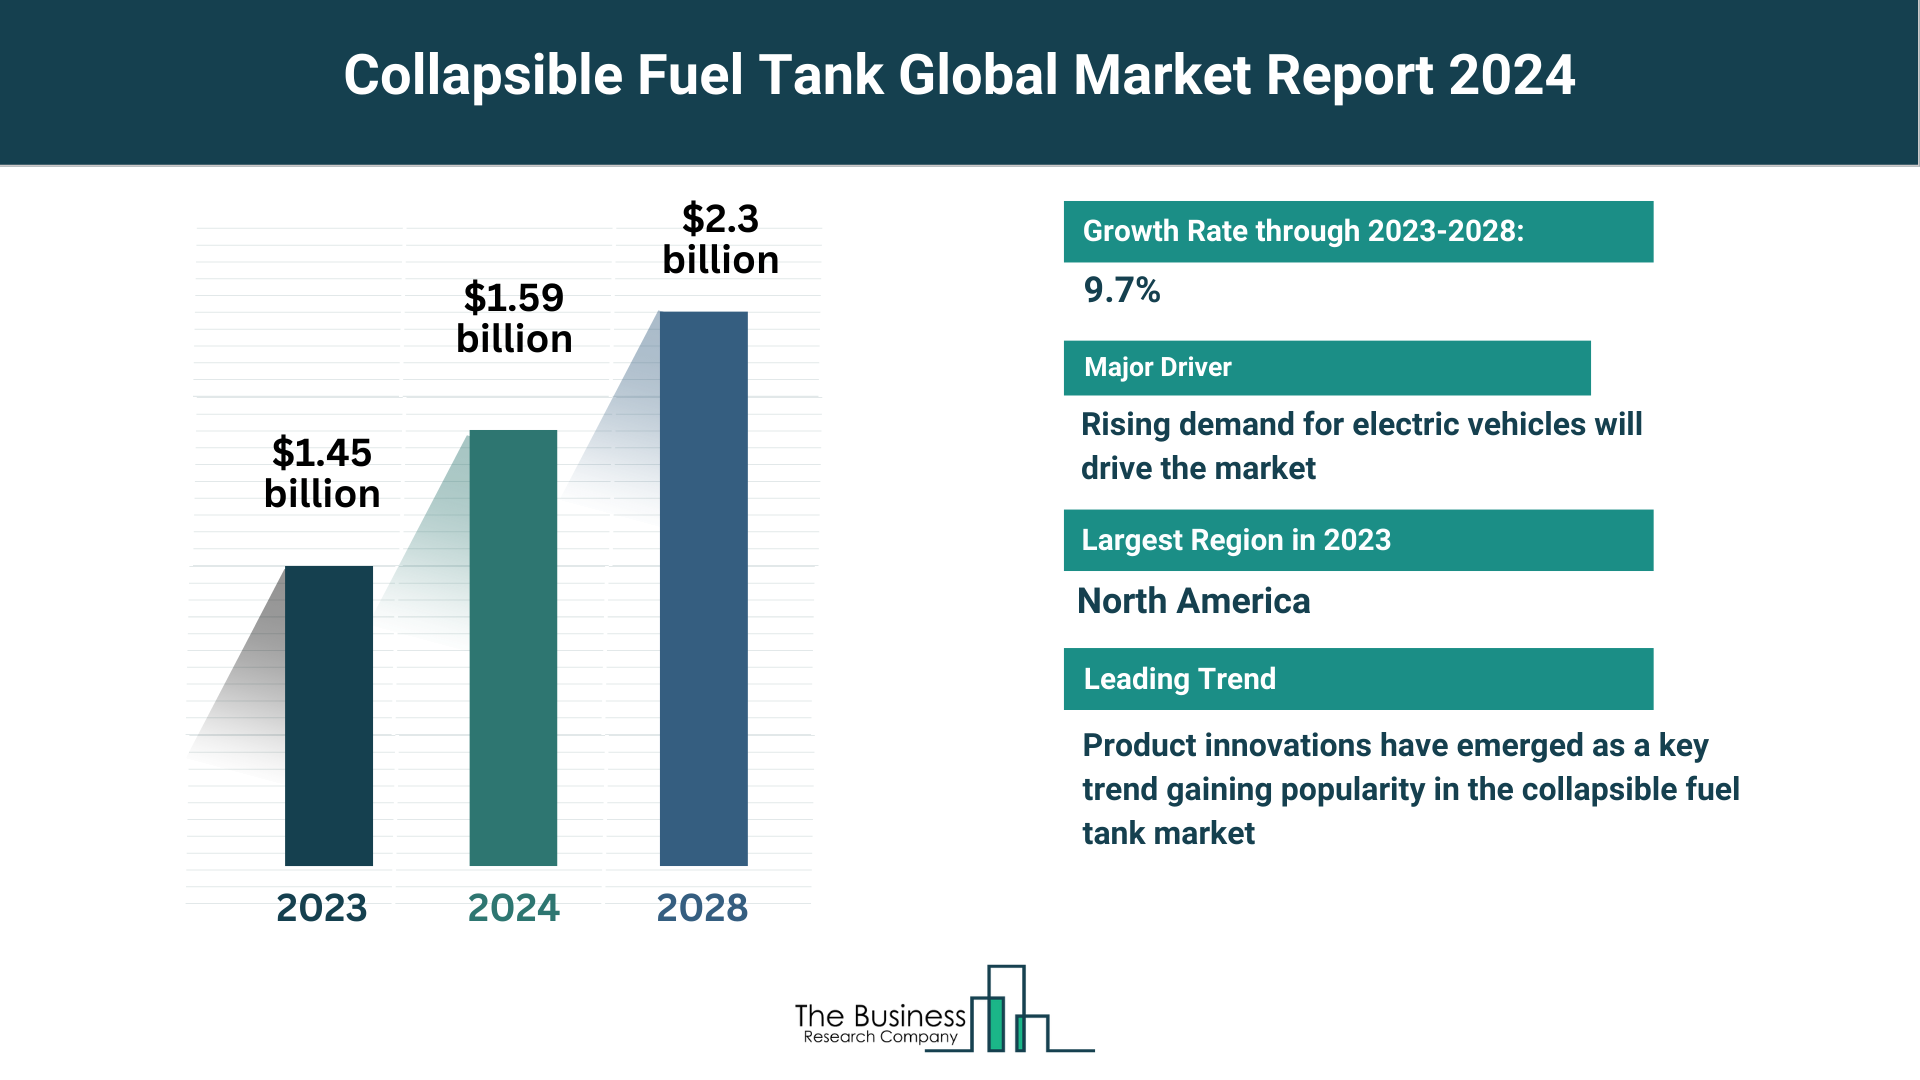 Global Collapsible Fuel Tank Market